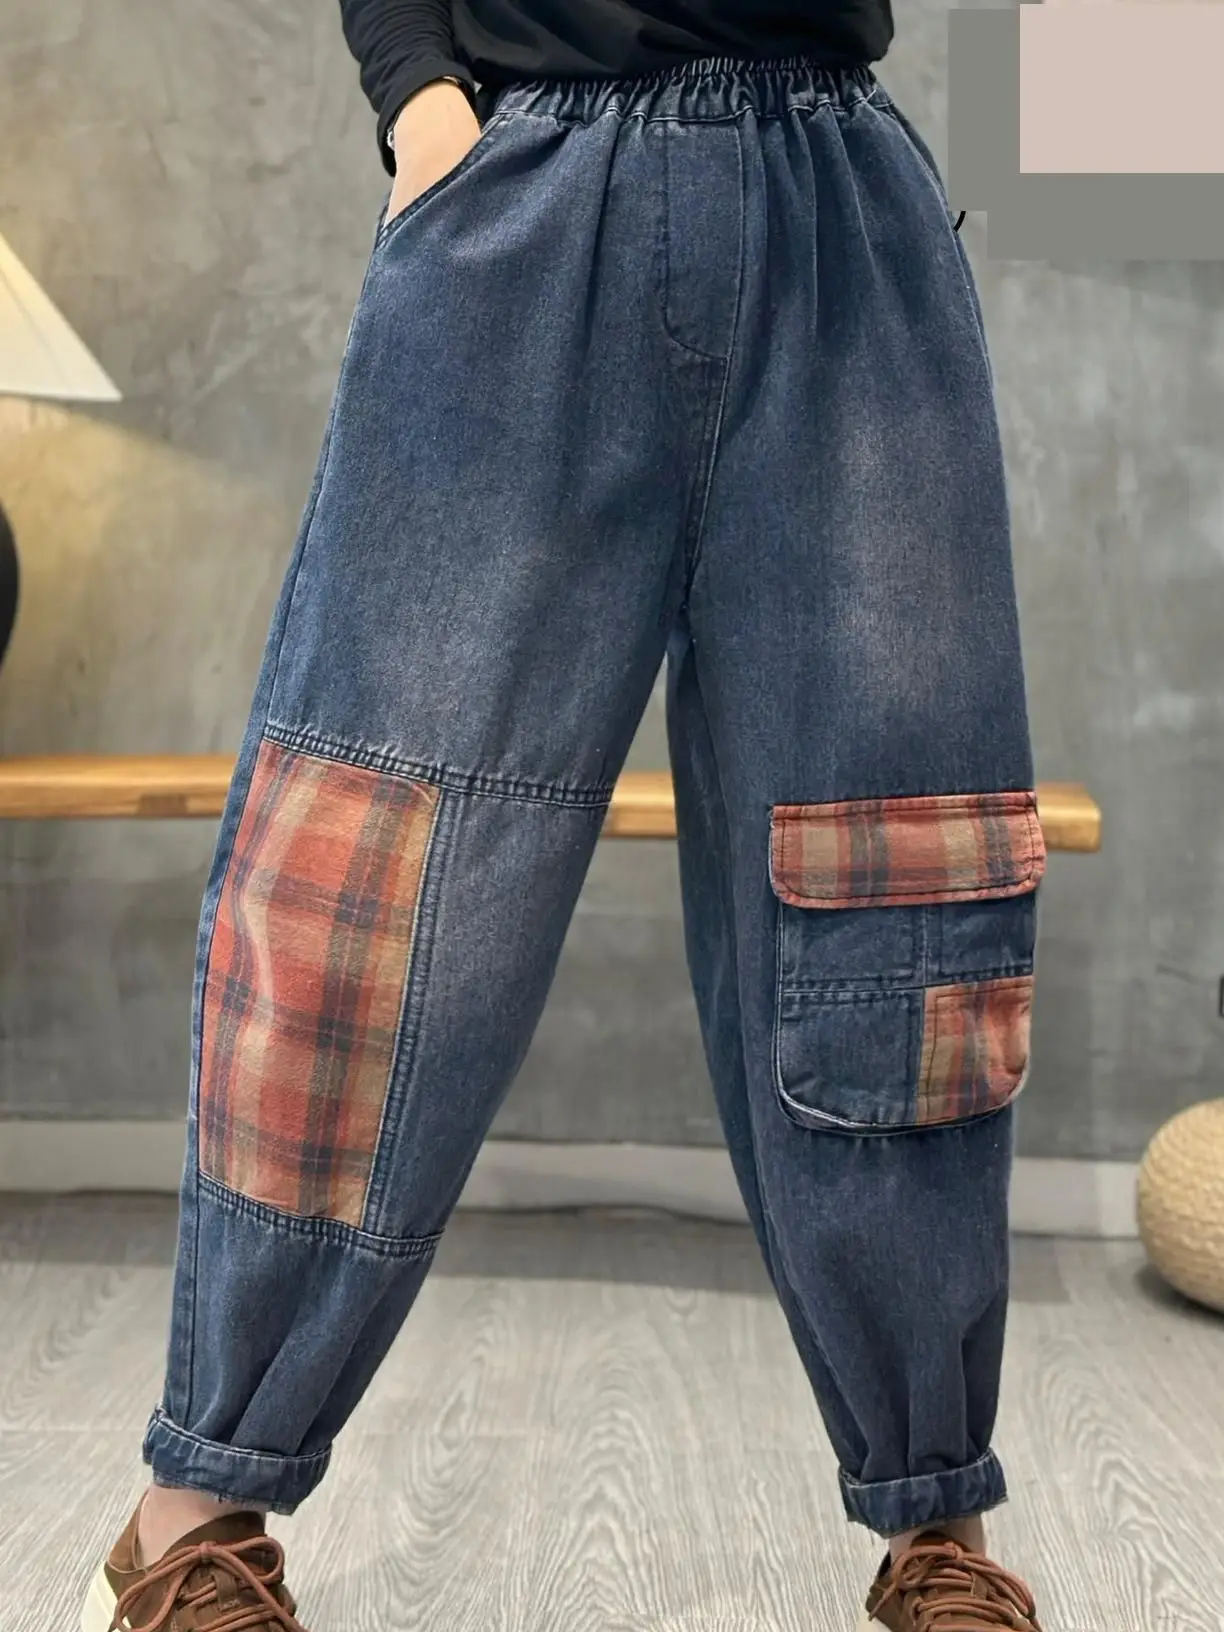 

Fashion Woman Autumn New Vintage Literary Baggy Jeans Pocket Patchwork Check High-waisted Loose Streetwear Denim Harem Pants